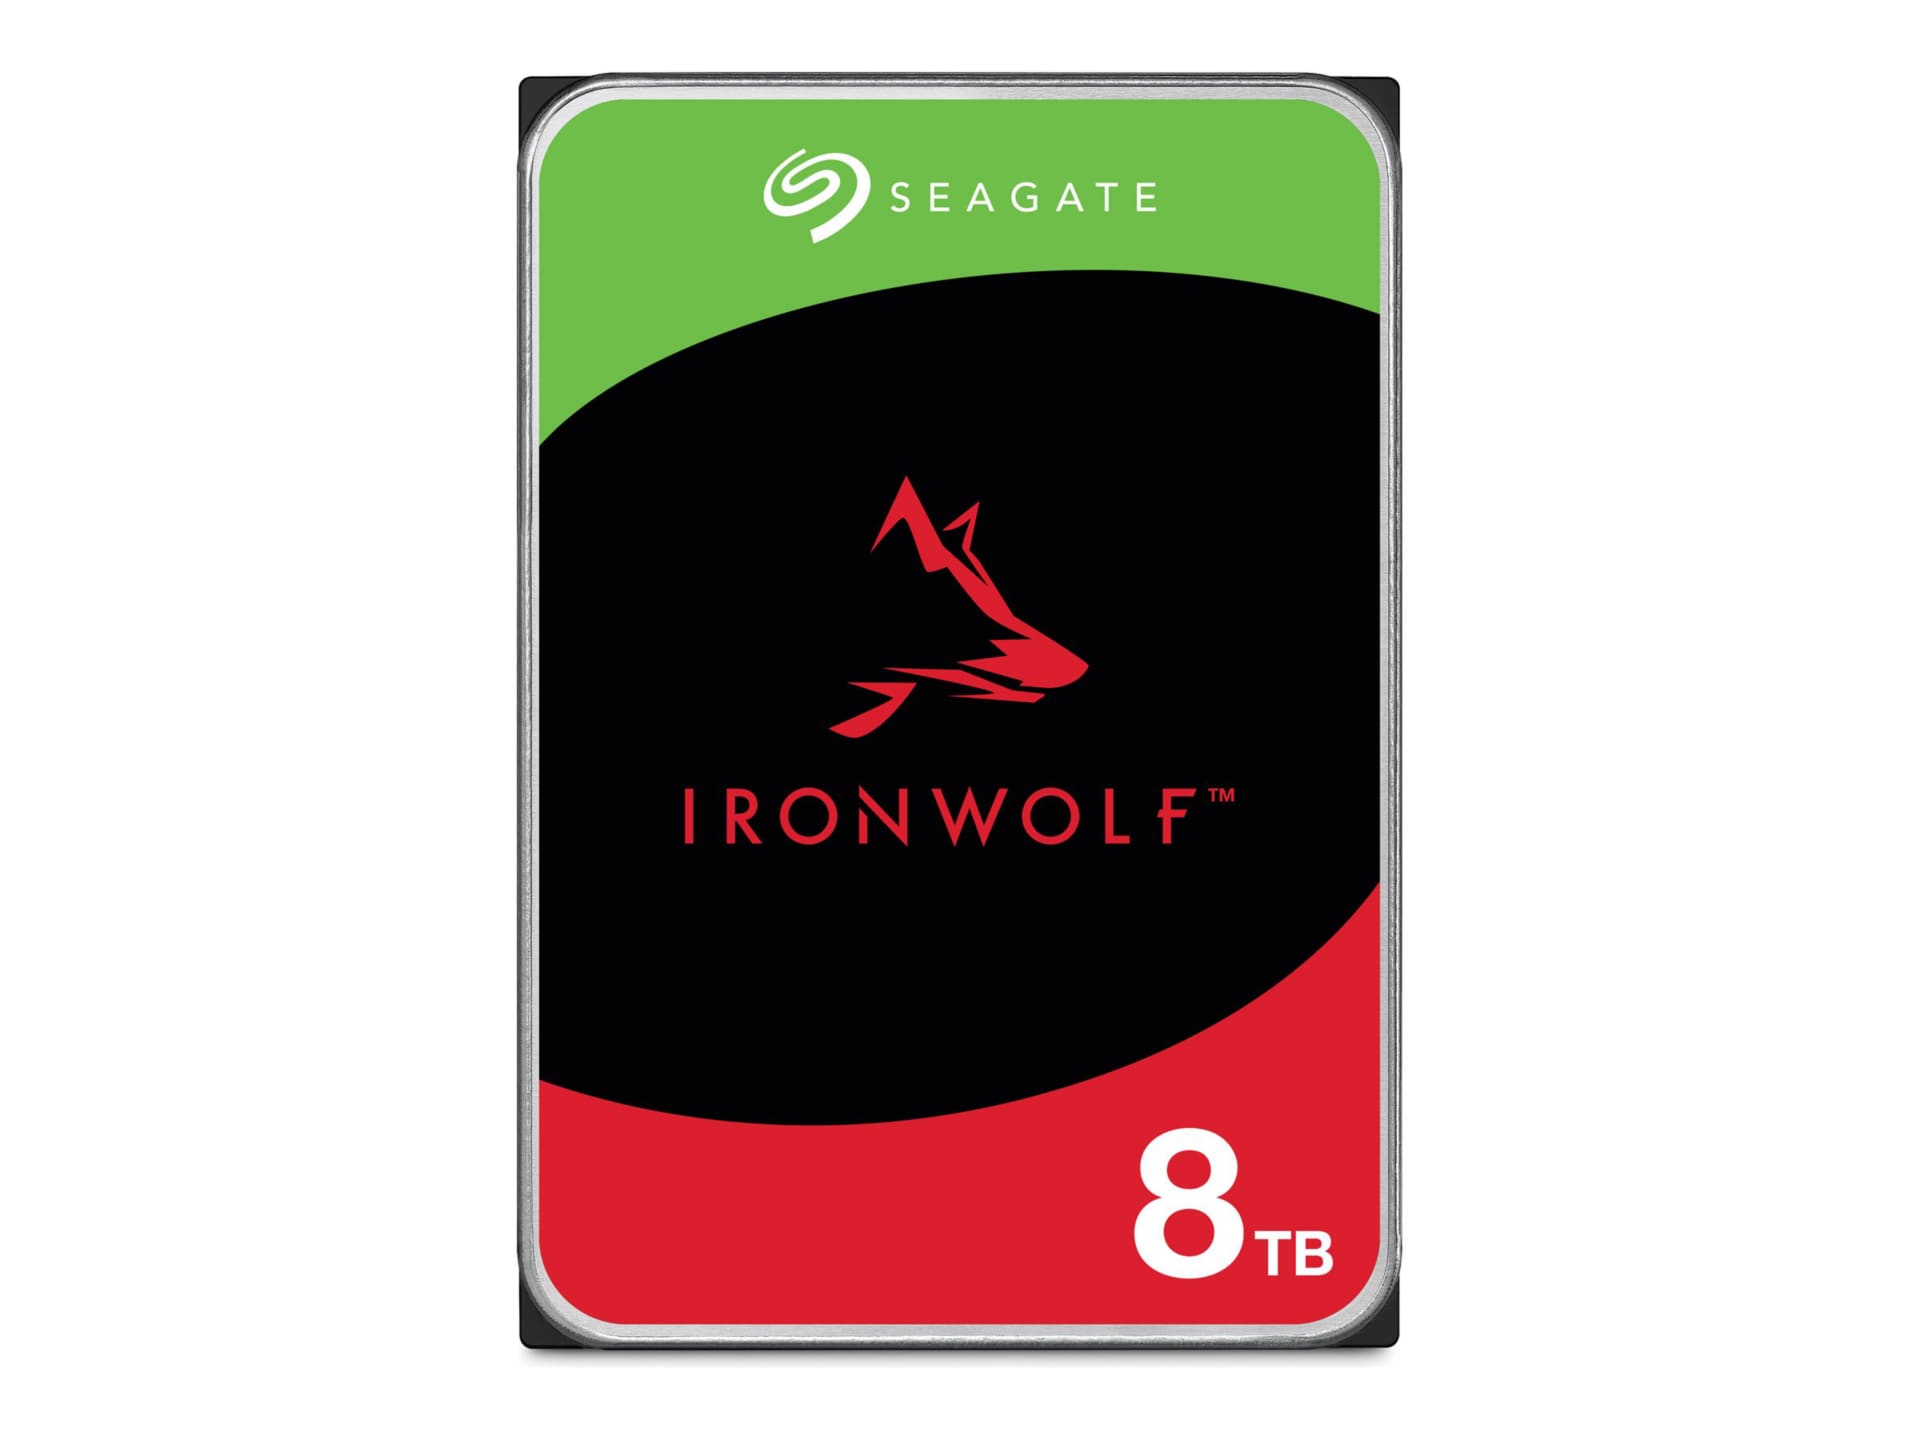 Disque Dur Seagate IronWolf 8To (8000Go) S-ATA (ST8000VN0022)